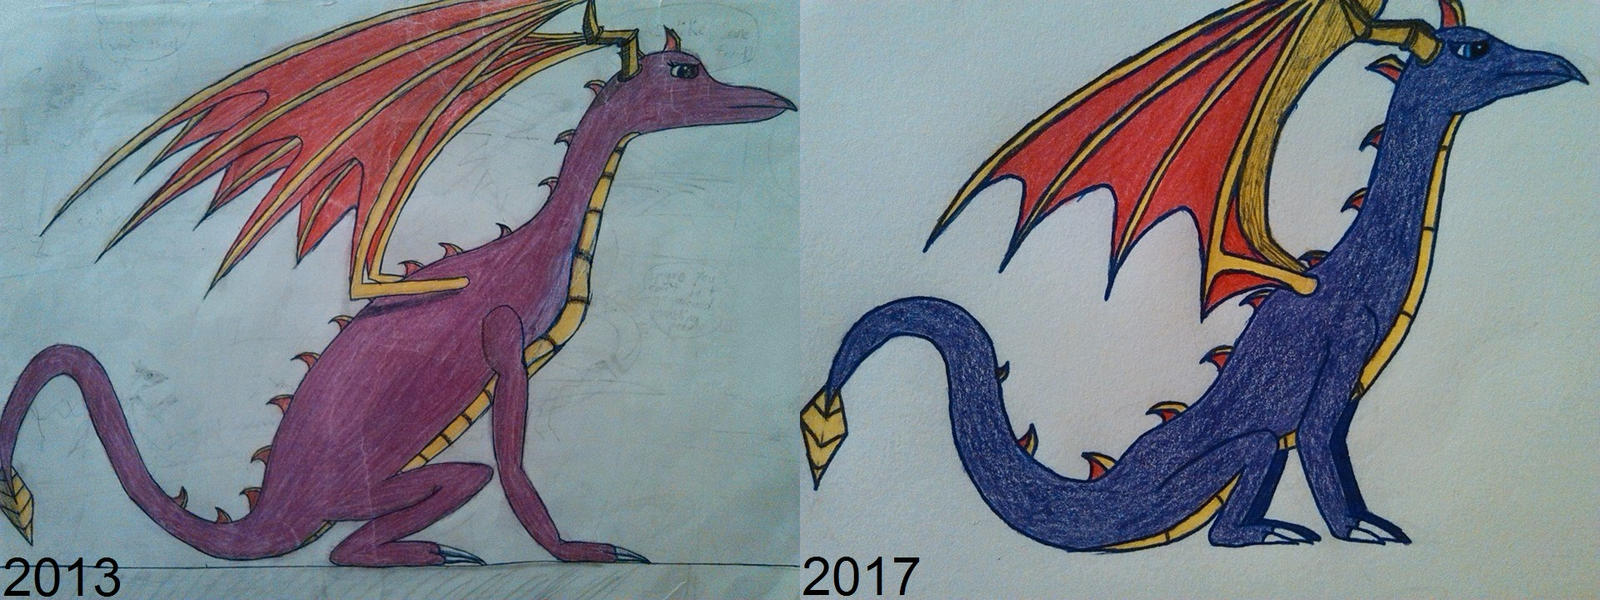 drawing_comparison__the_legend_of_spyra_